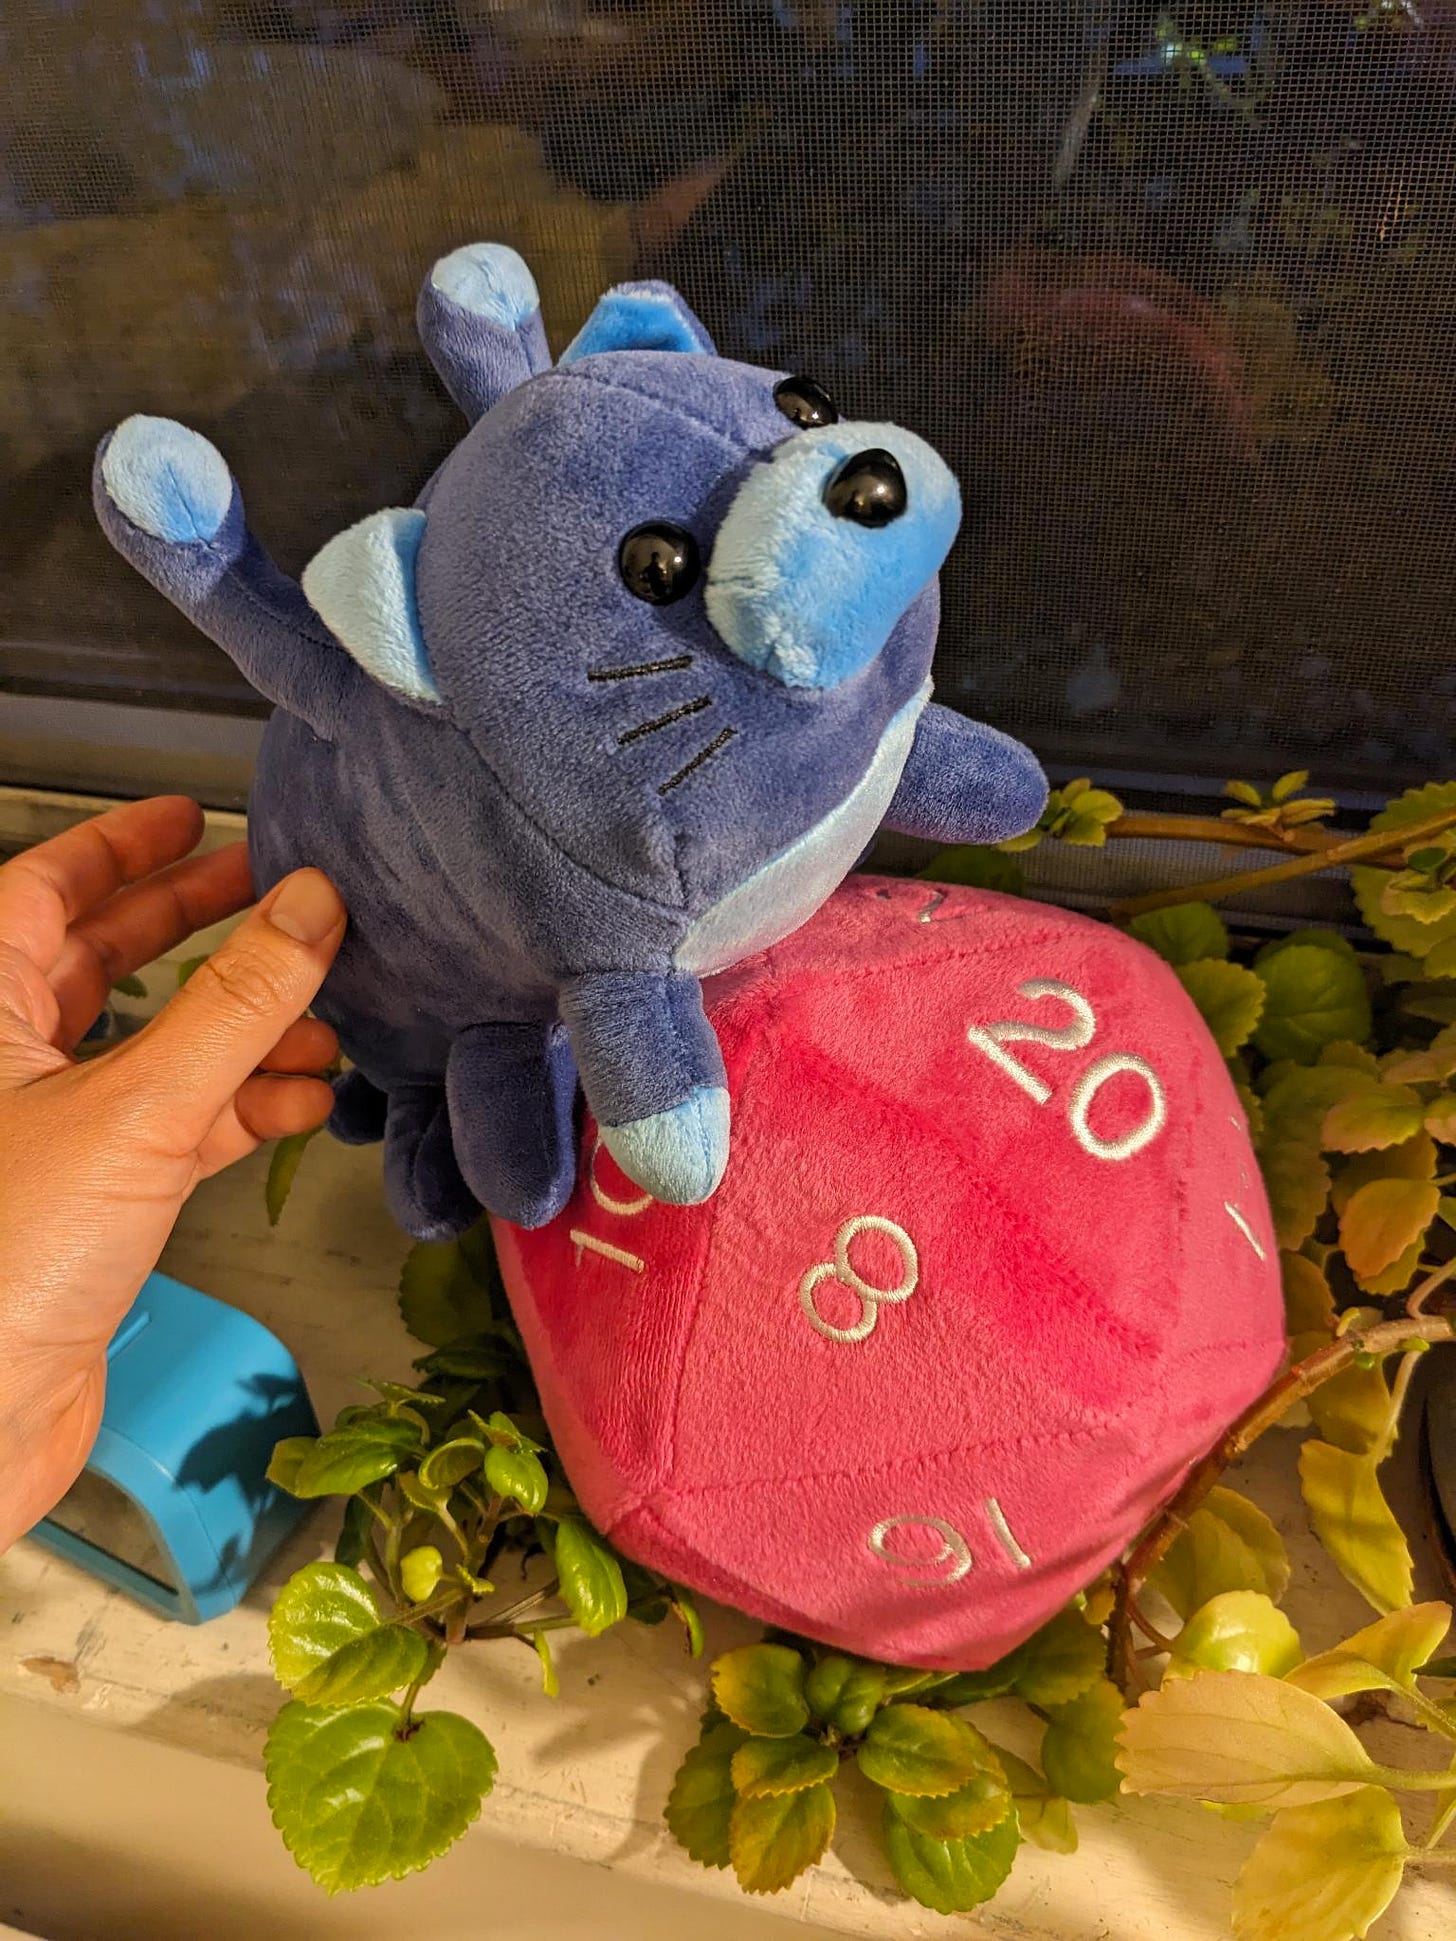 An adorable, cat-like displacer beast plushie sits atop a 20-sided pink dice plushie.